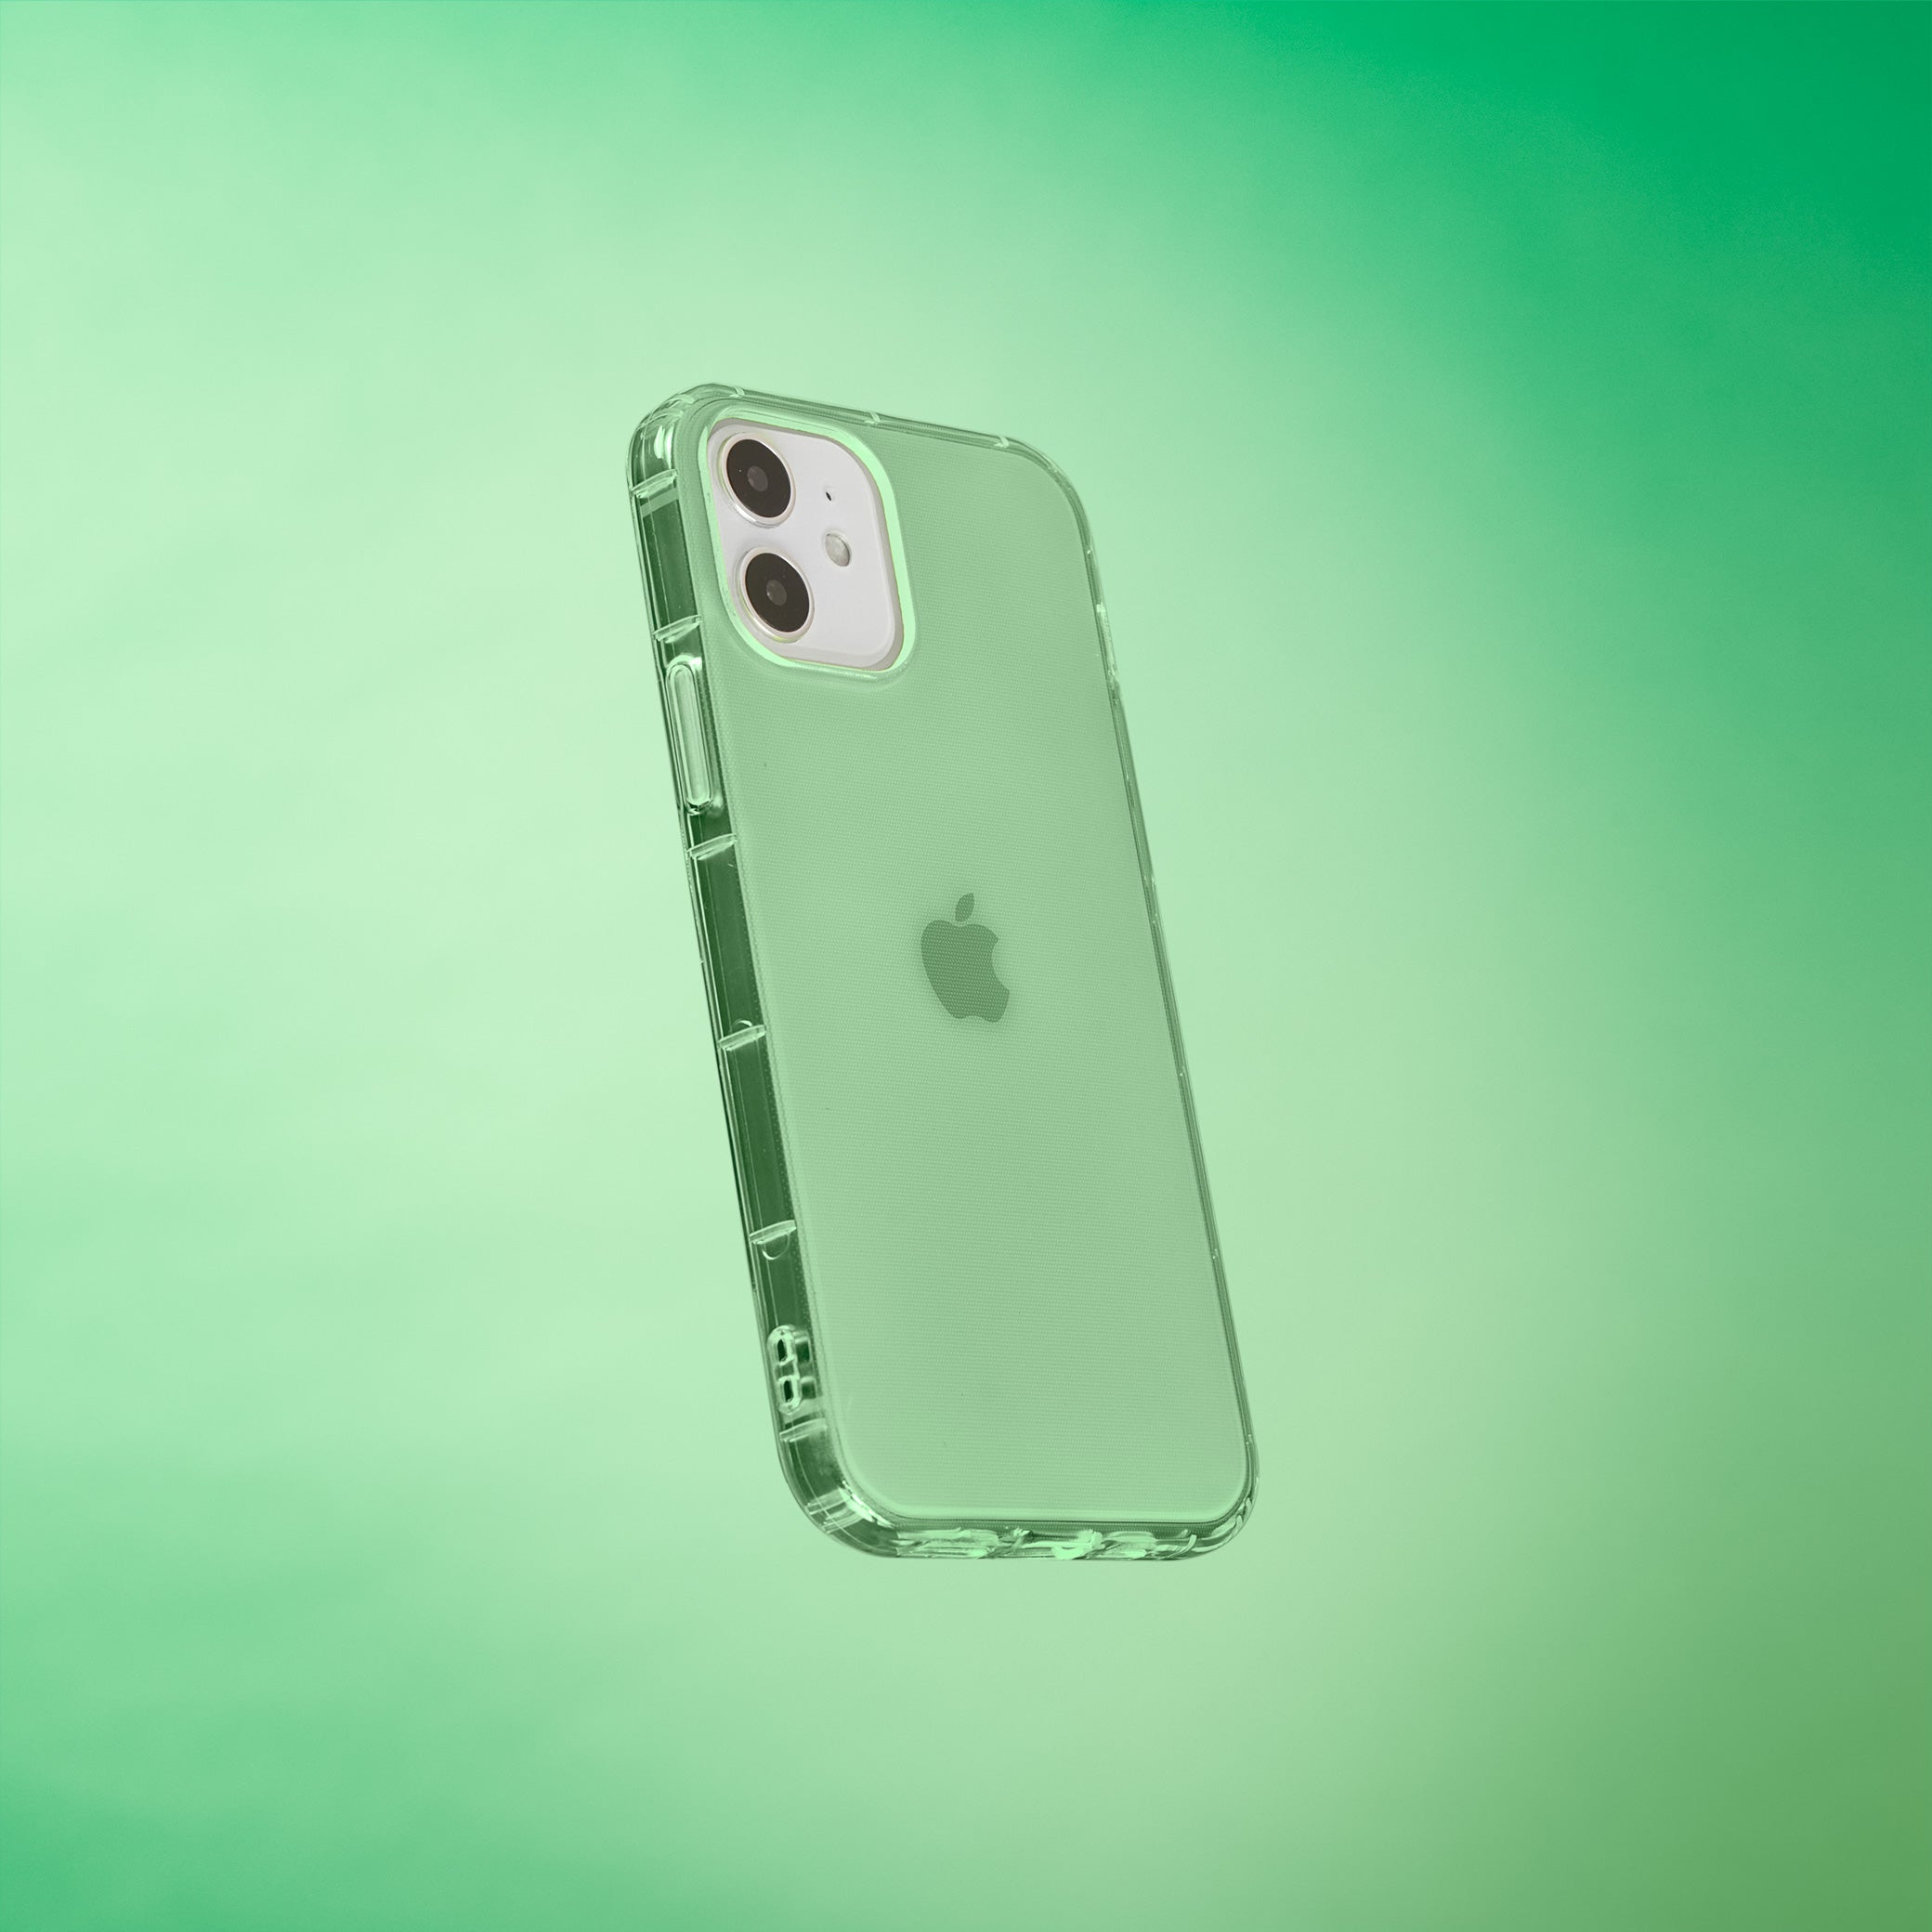 Highlighter Case for iPhone 12 & iPhone 12 Pro - Precious Emerald Green